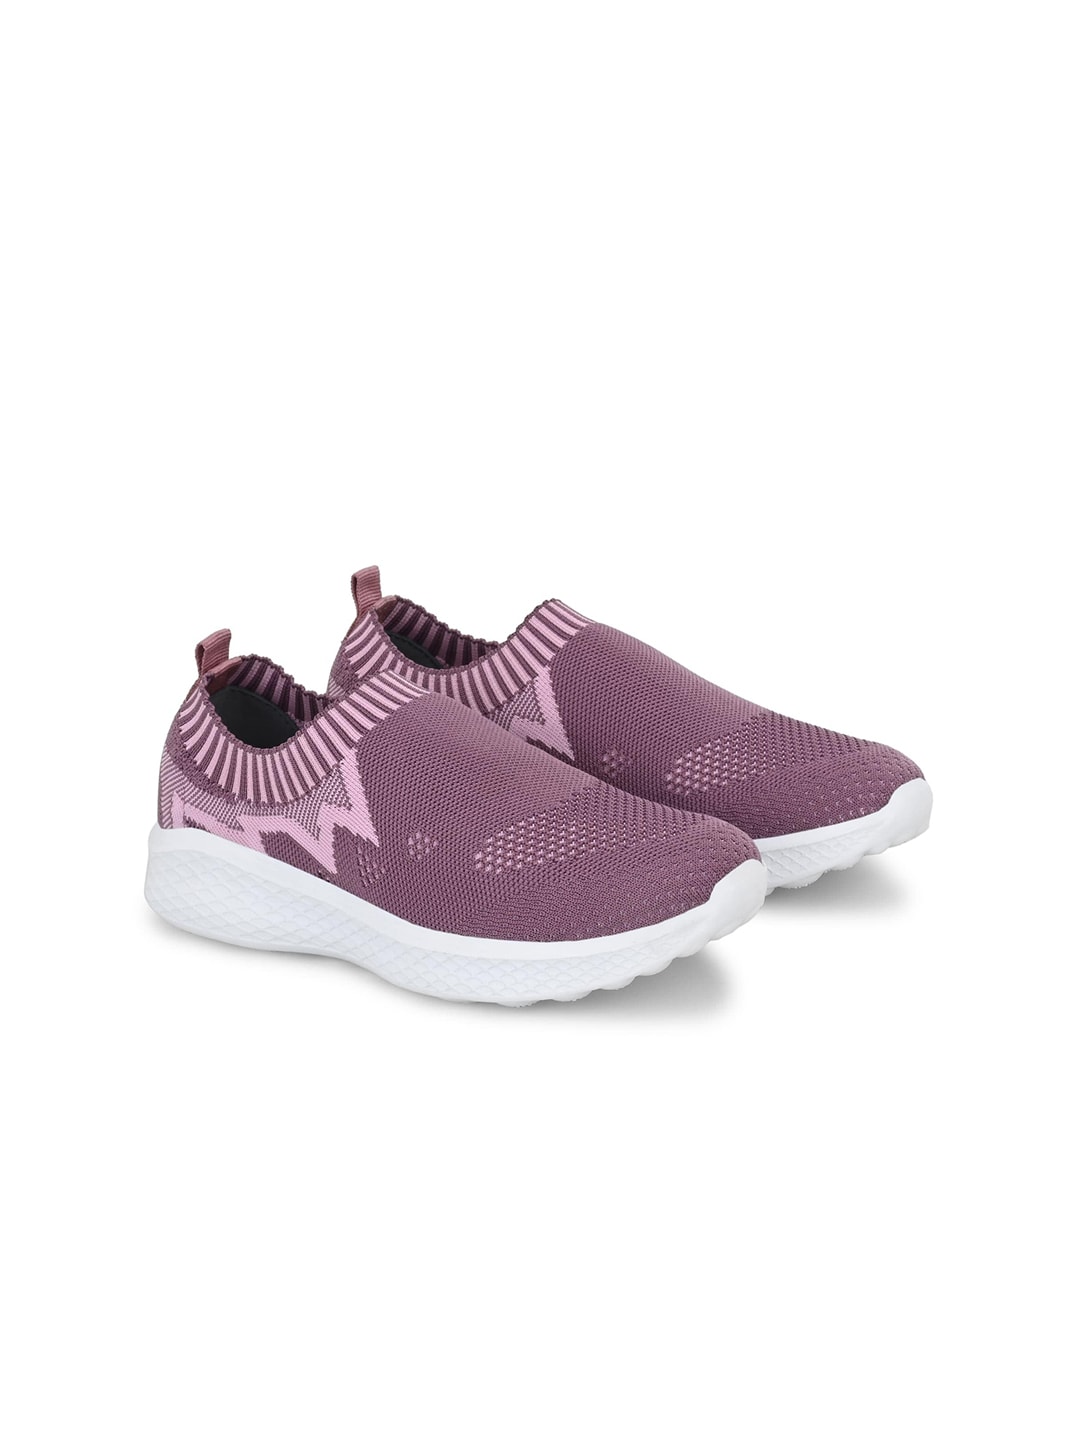 Roadster Women Pink & White Woven Design Slip-On Sneakers Price in India